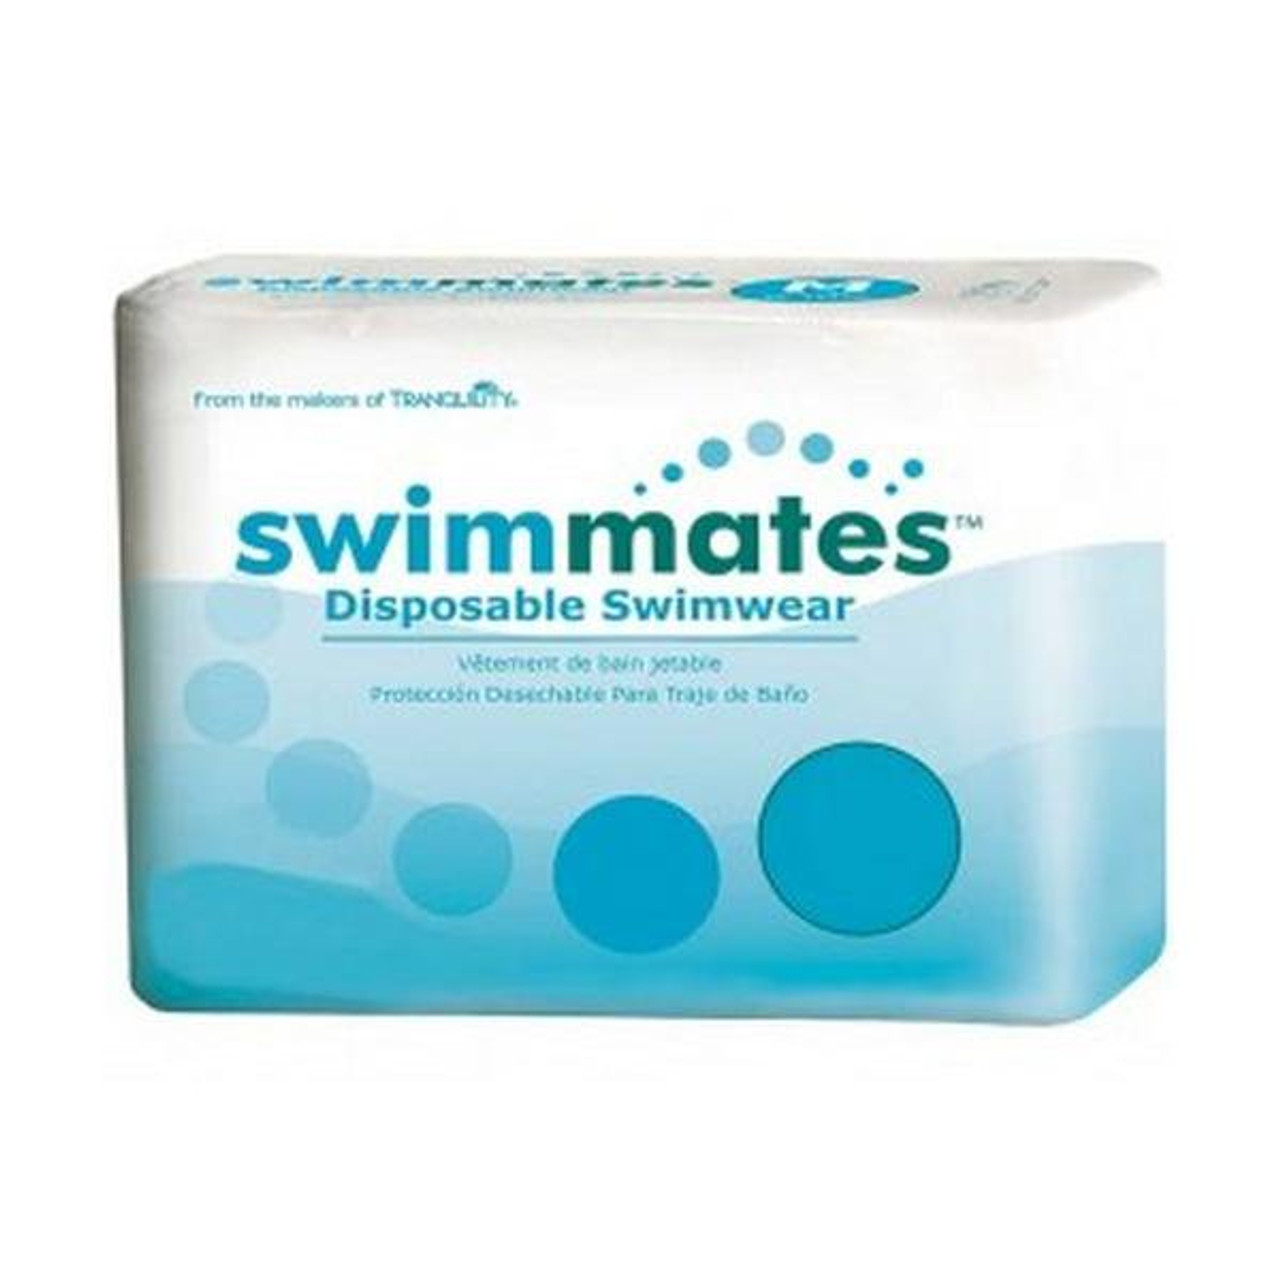 Tranquility 2845 Swimmates, Medium, 34 to 48 w/h or 120-175 lbs., 4x20s